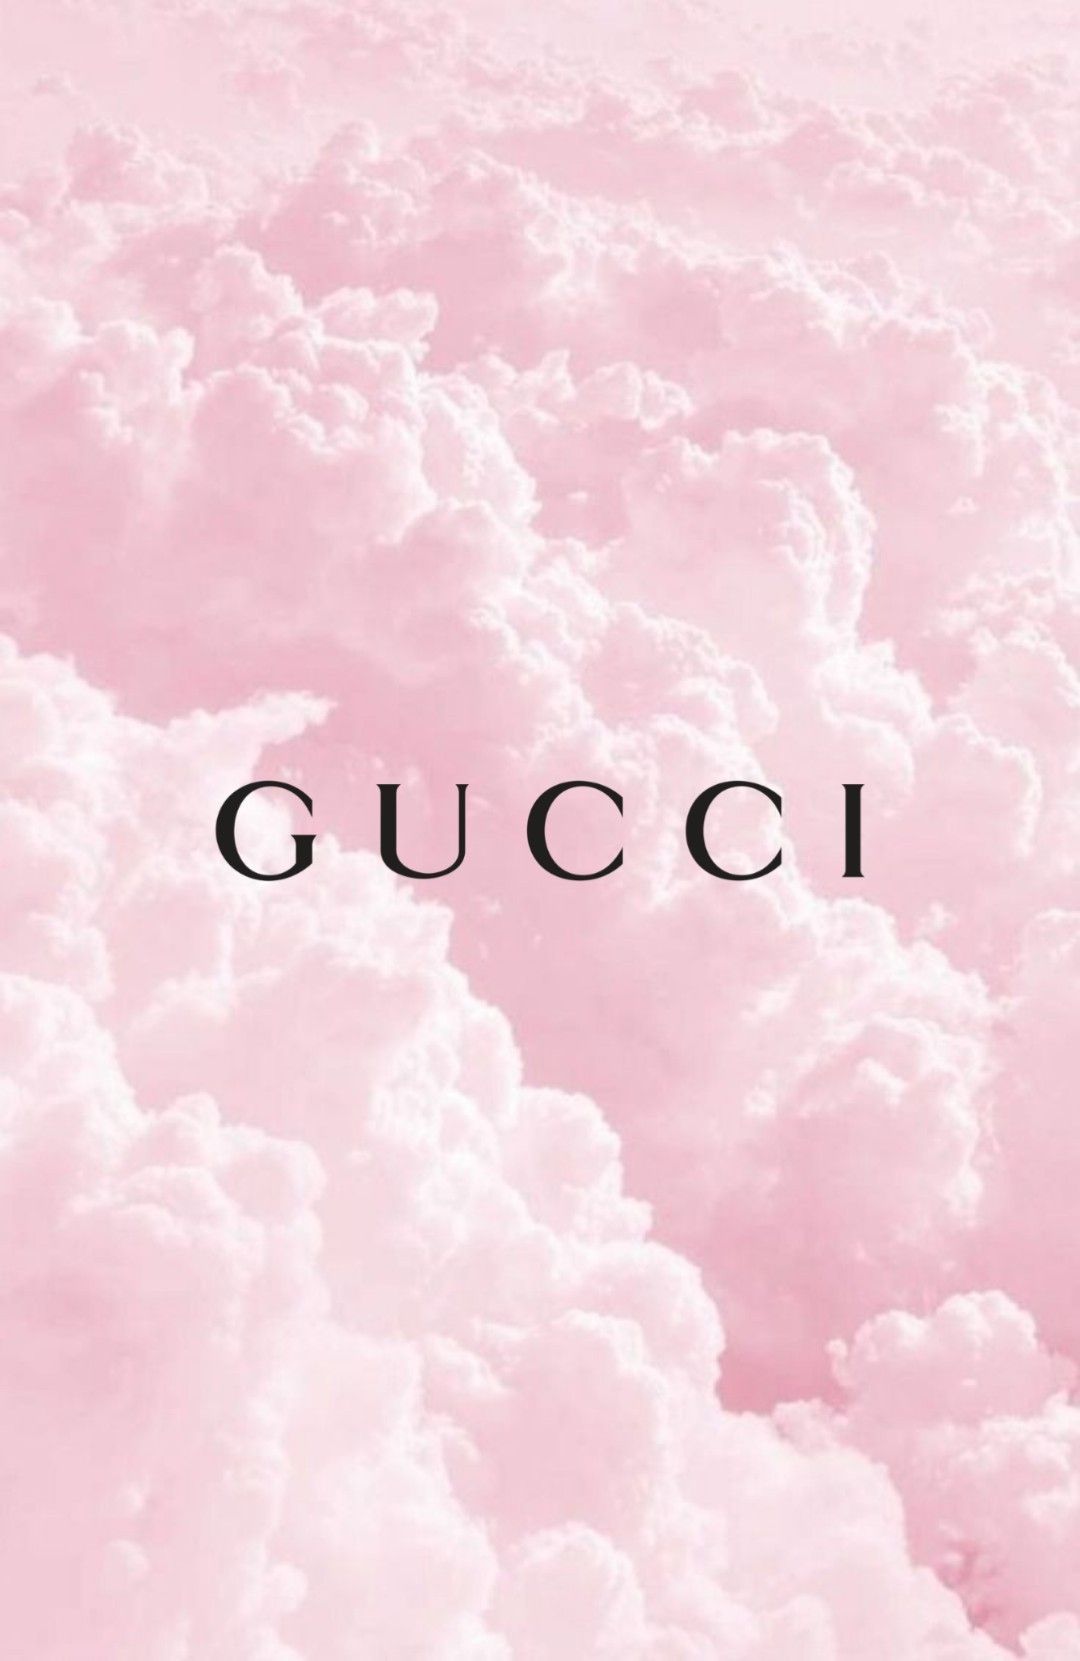 Gucci wallpaper. iPhone wallpaper girly, iPhone wallpaper vintage, Wallpaper vintage